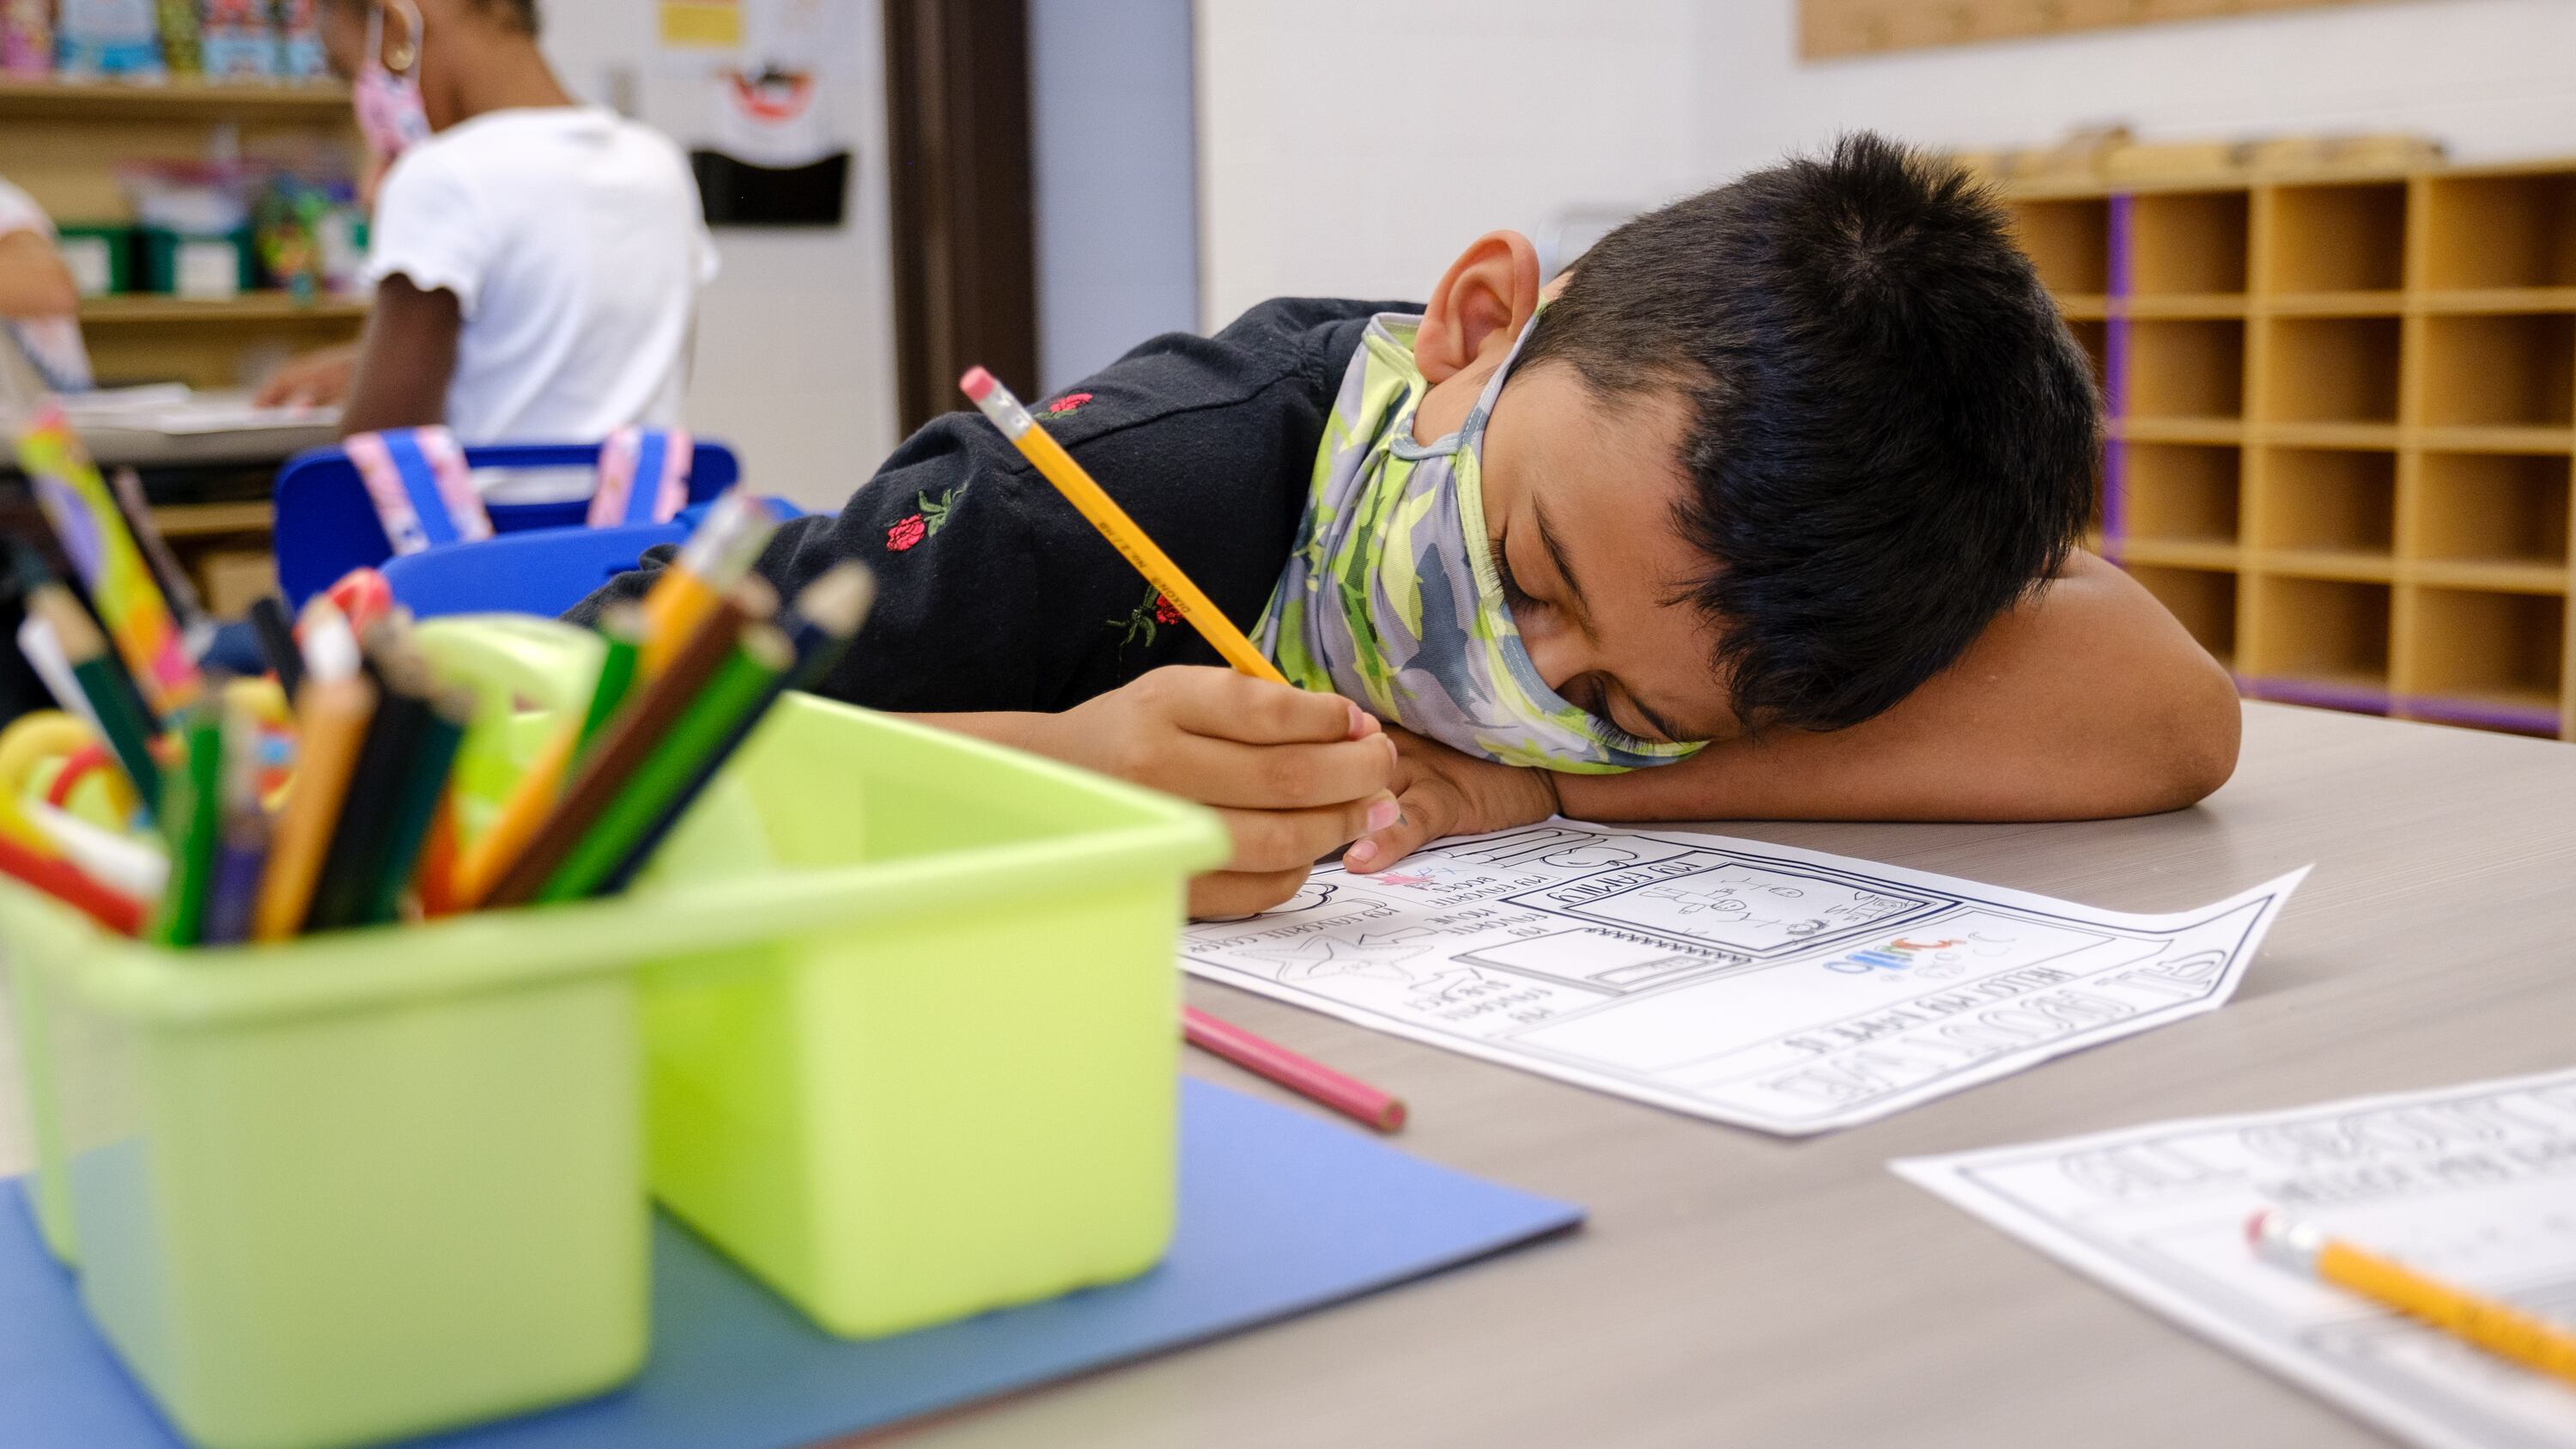 A young boy wearing a mask rests his head on a desk as he completes a worksheet.